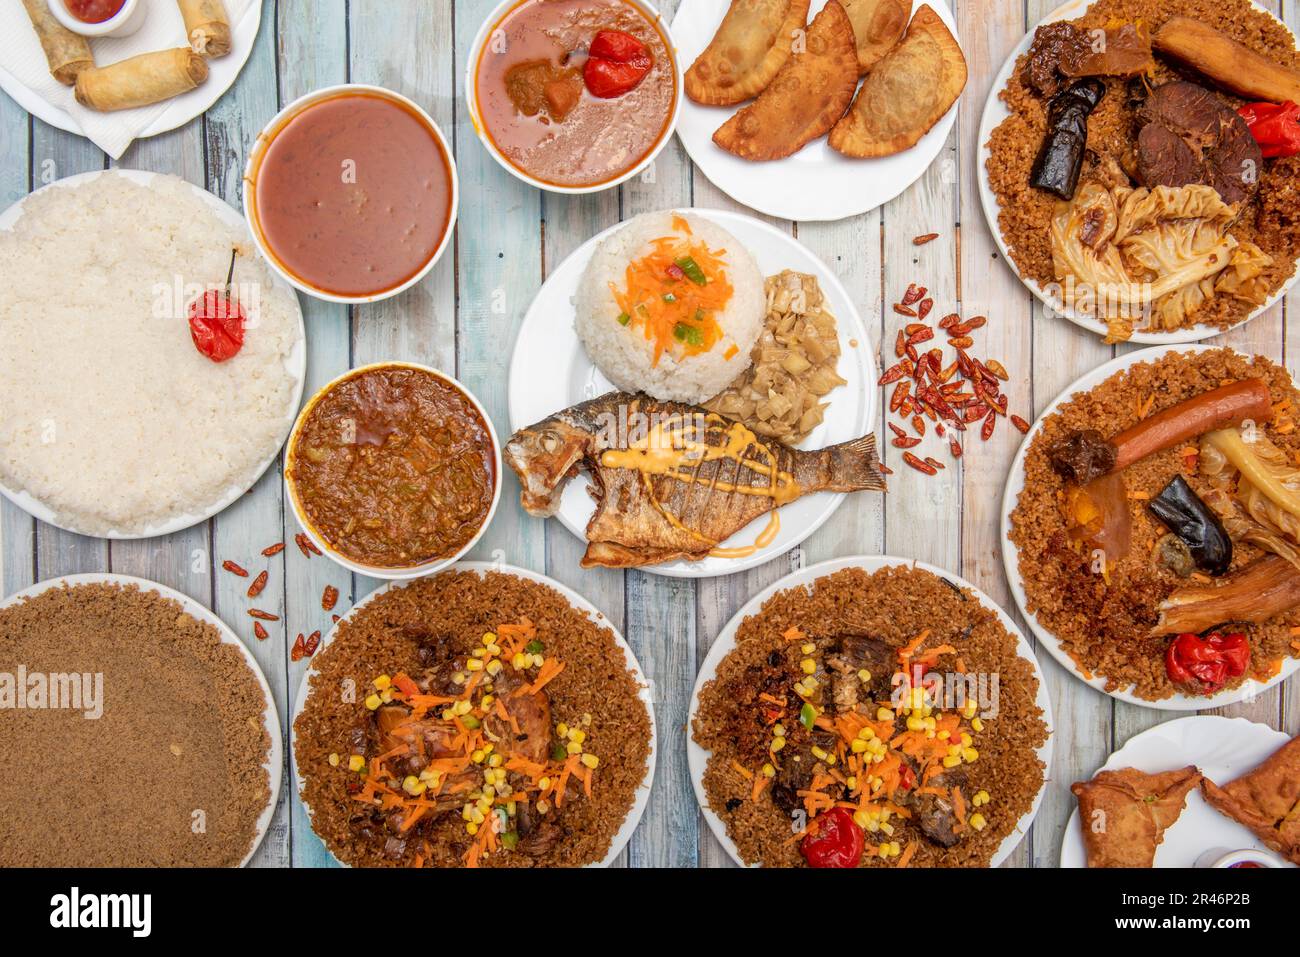 Set of assorted African food dishes with fried fish, patties, stews and white rice Stock Photo